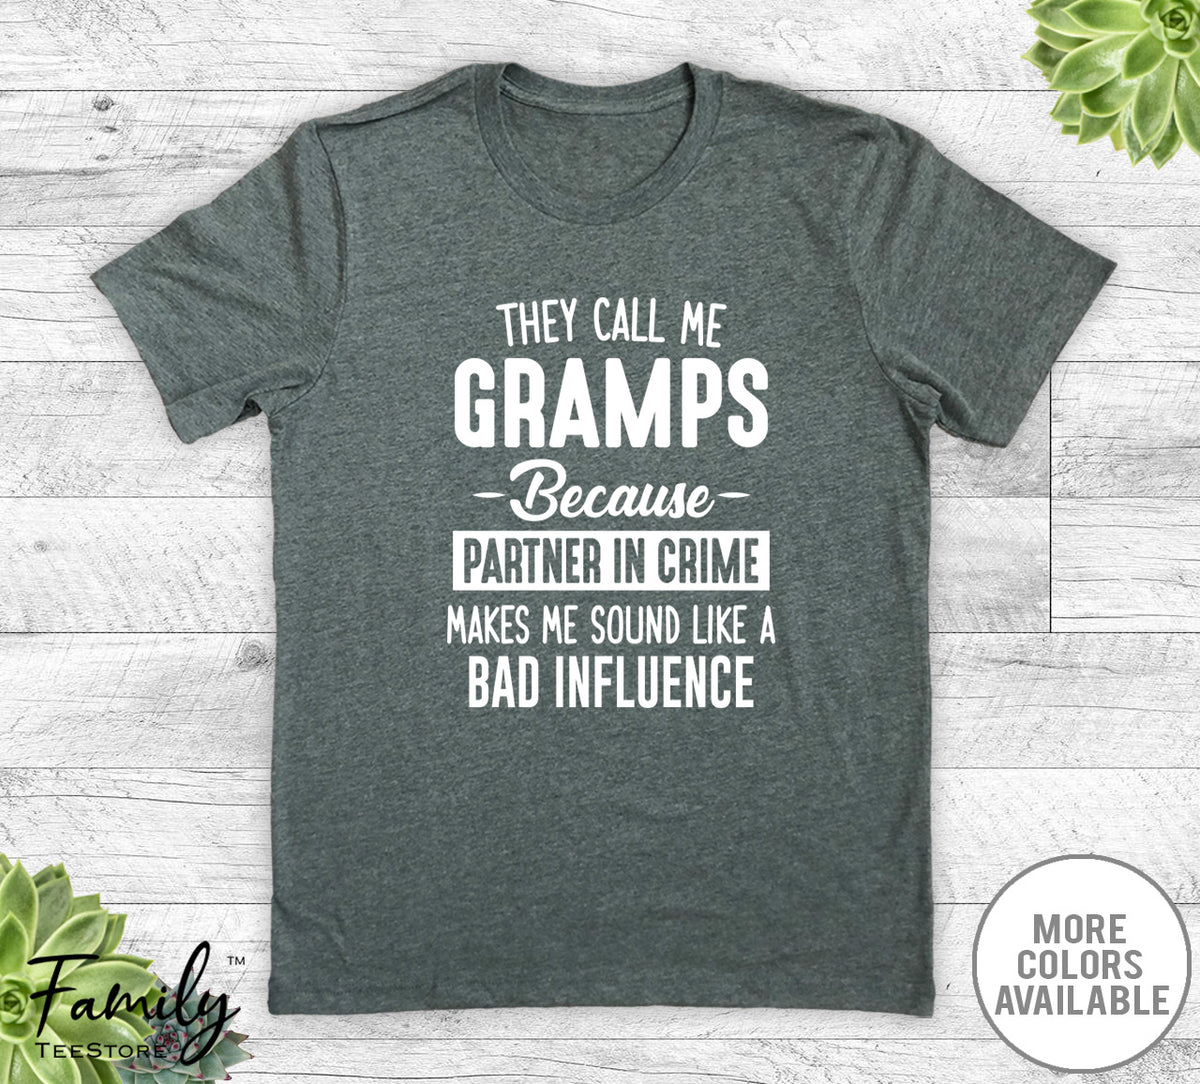 They Call Me Gramps Because Partner In Crime... - Unisex T-shirt - Gramps Shirt - Gramps Gift - familyteeprints